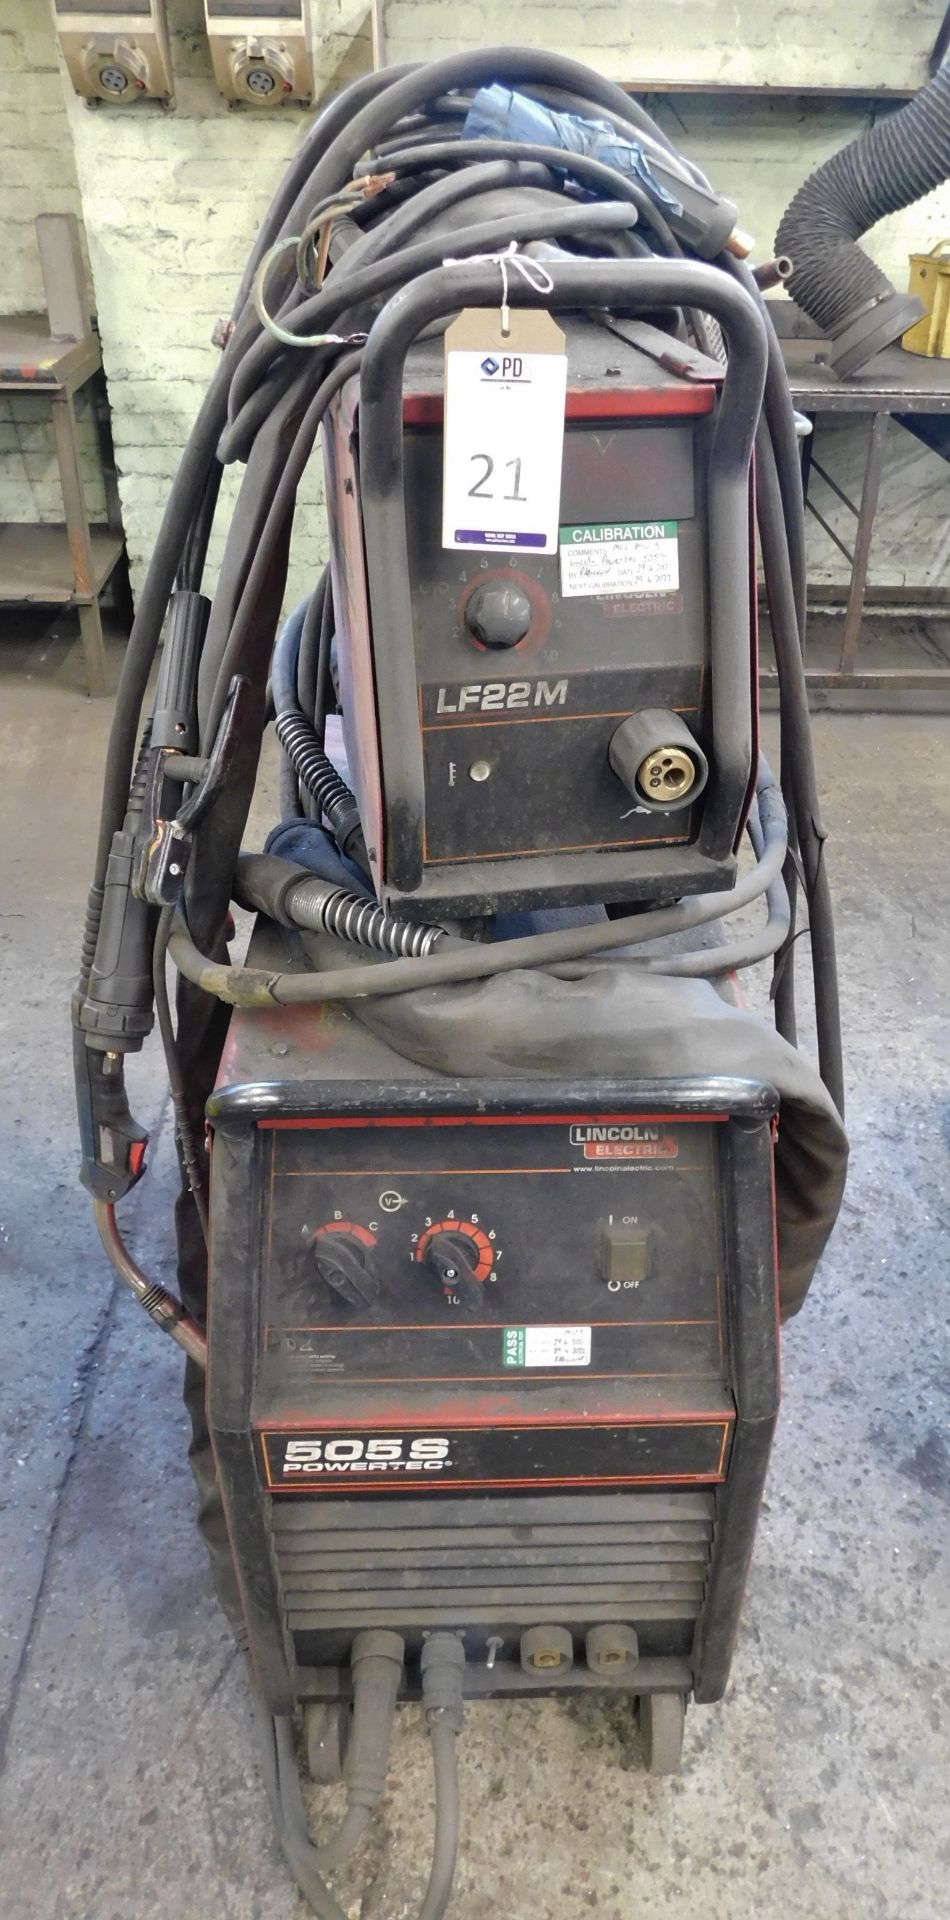 Lincoln 505 S Powertec Mig Welder (2005) with LF22M Wire Feed (Location: Tottenham. Please Refer